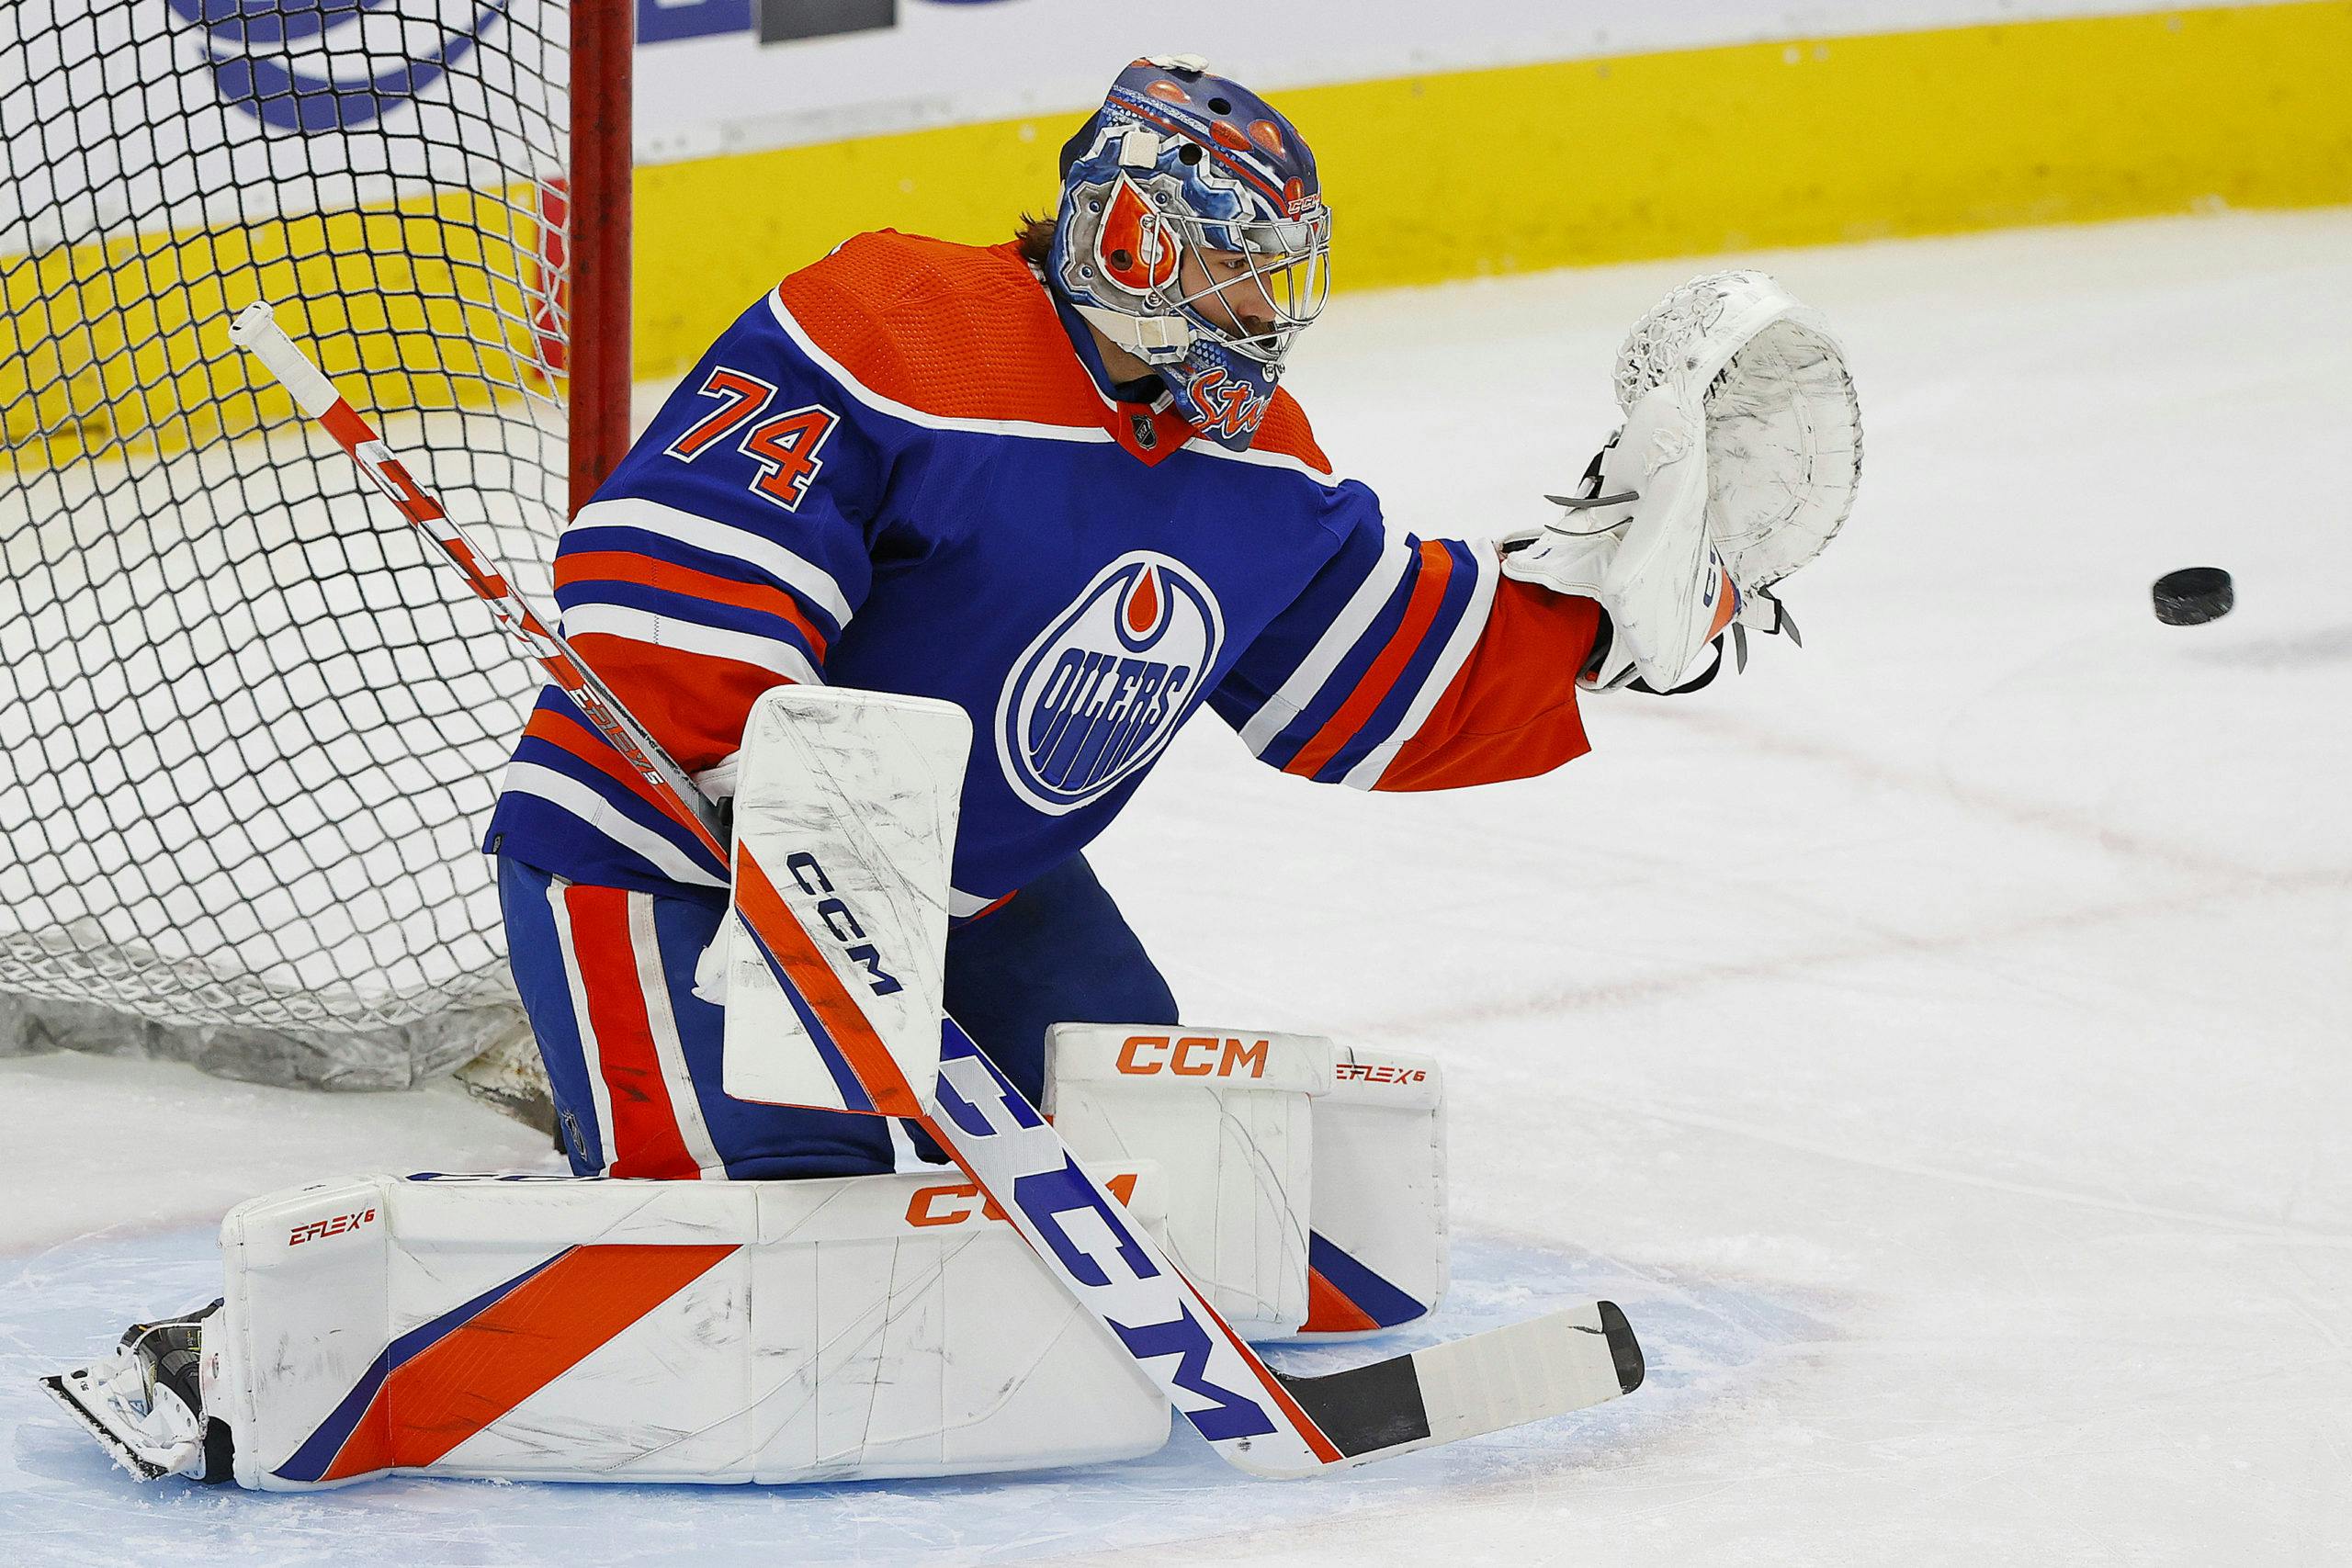 Cracked stick to blame for Stuart Skinner's gaffe but Oilers prevailed